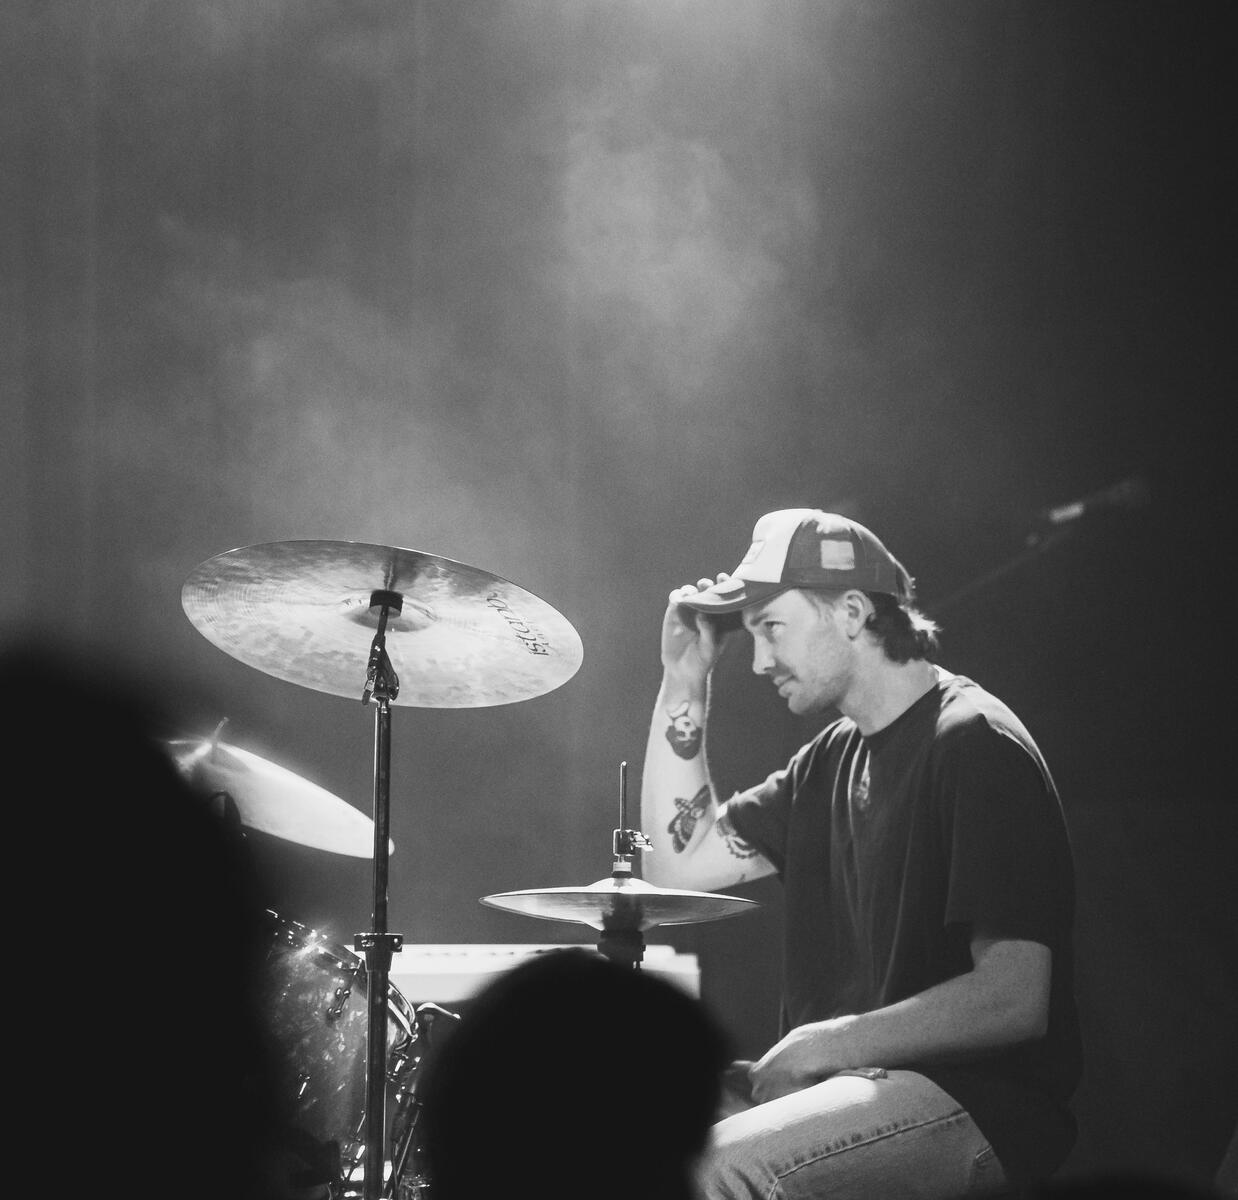 Black and white of drummer tipping his hat while on the drums. Band is "Loviet"